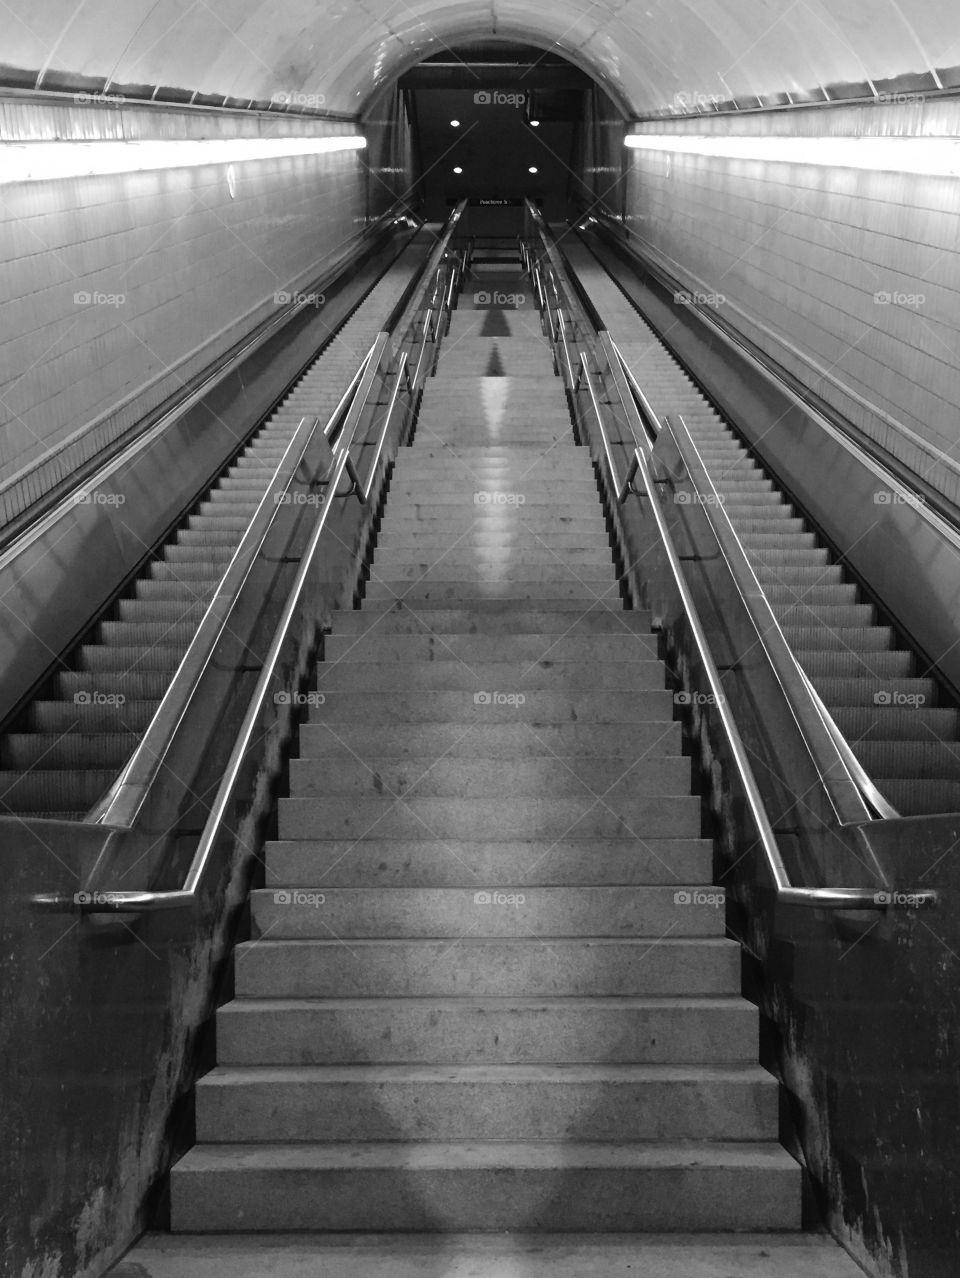 Atlanta Subway. This was such an imposing staircase that I need to capture it's size.